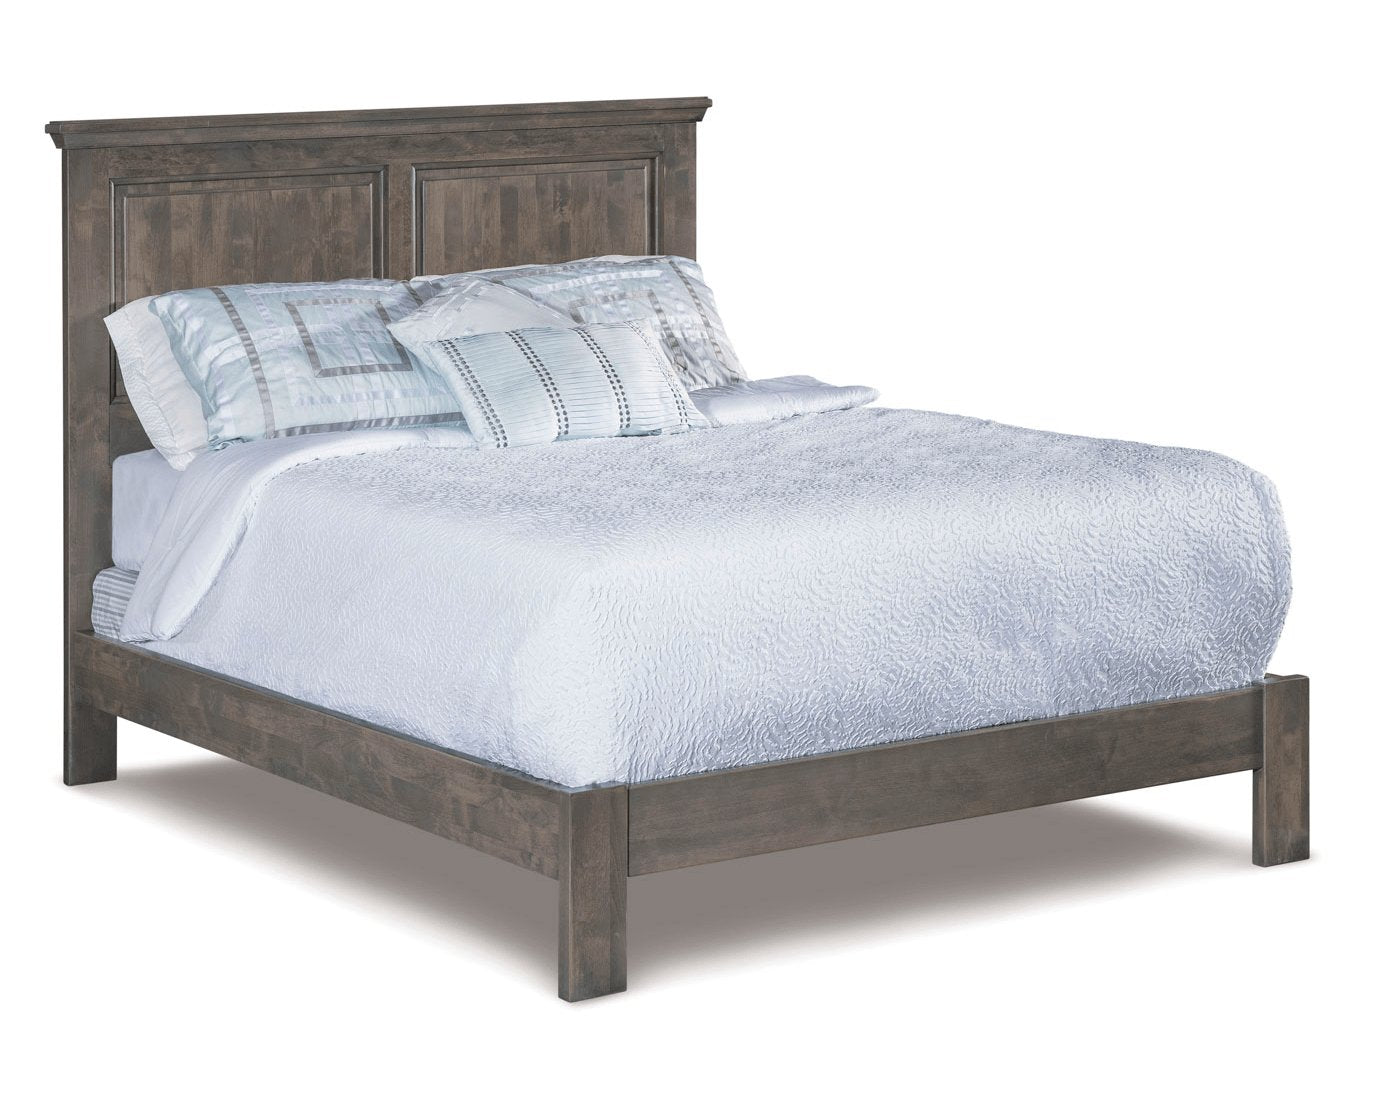 Heritage Raised Panel Bed - Baconco